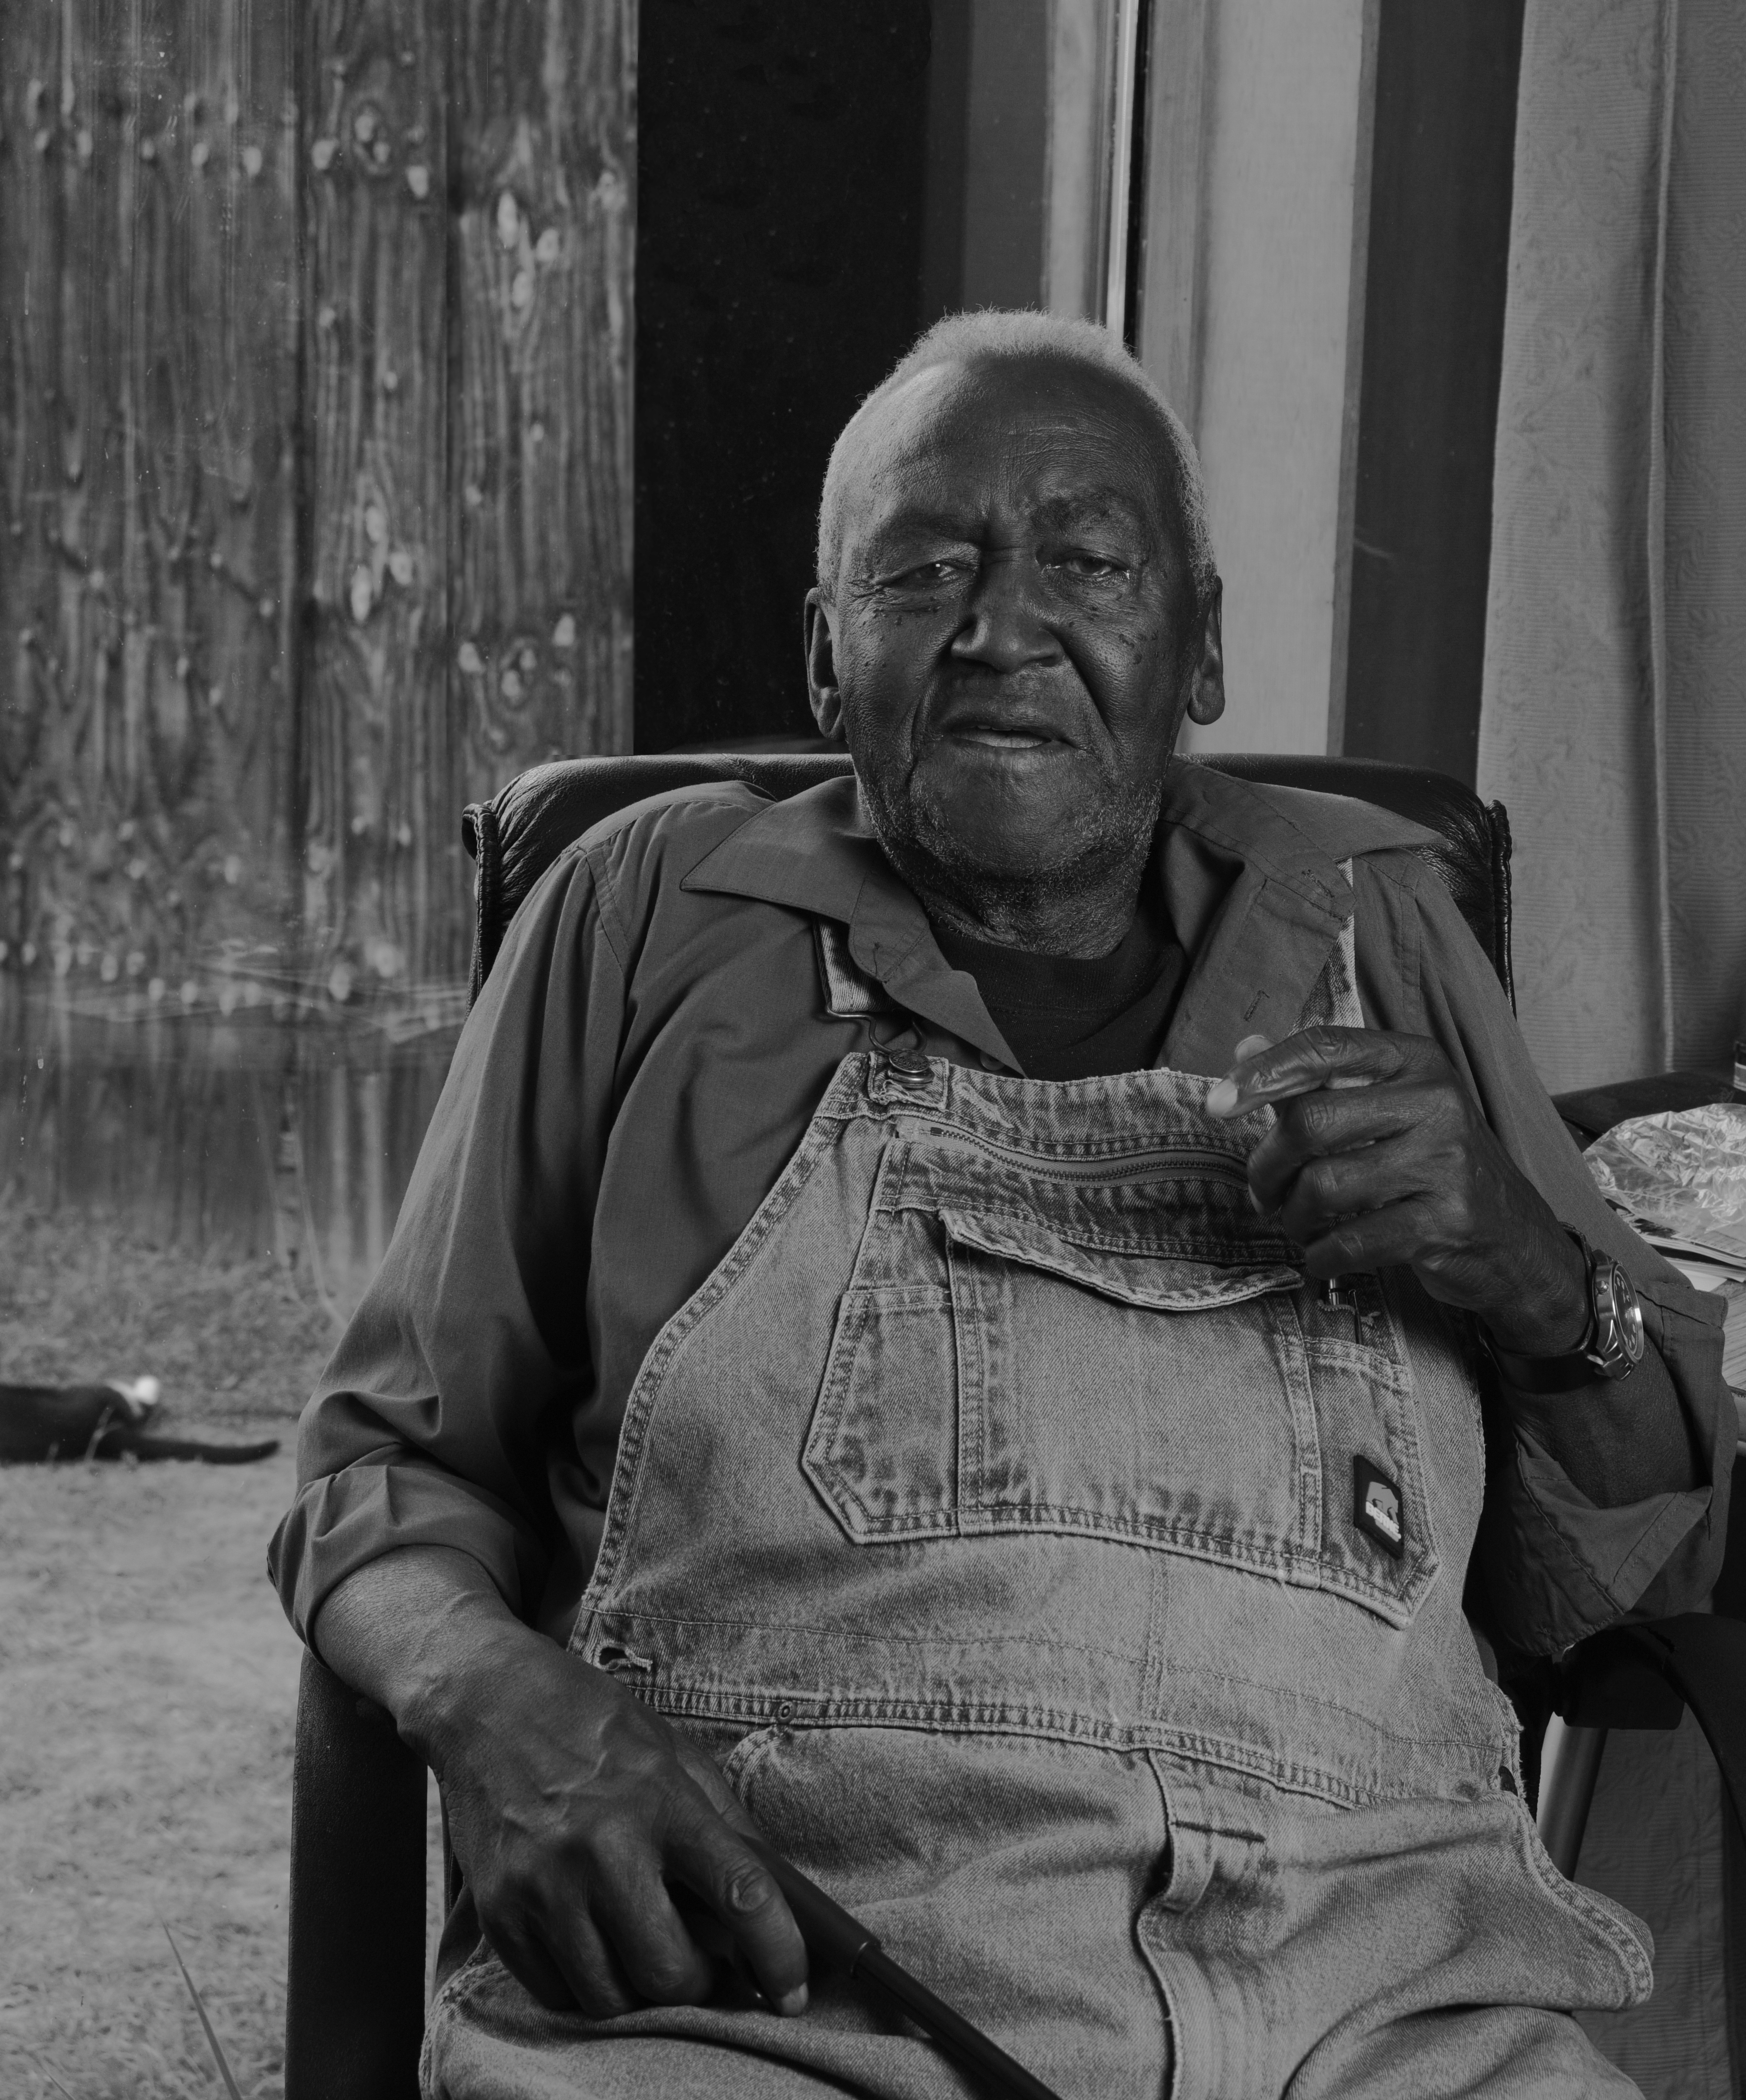 A black-and-white portrait of a Black man sitting down, from the waist up. He wears overalls and a collard, quarter-length sleeved shirt. His hair is short, and his left hand is raised as he speaks.